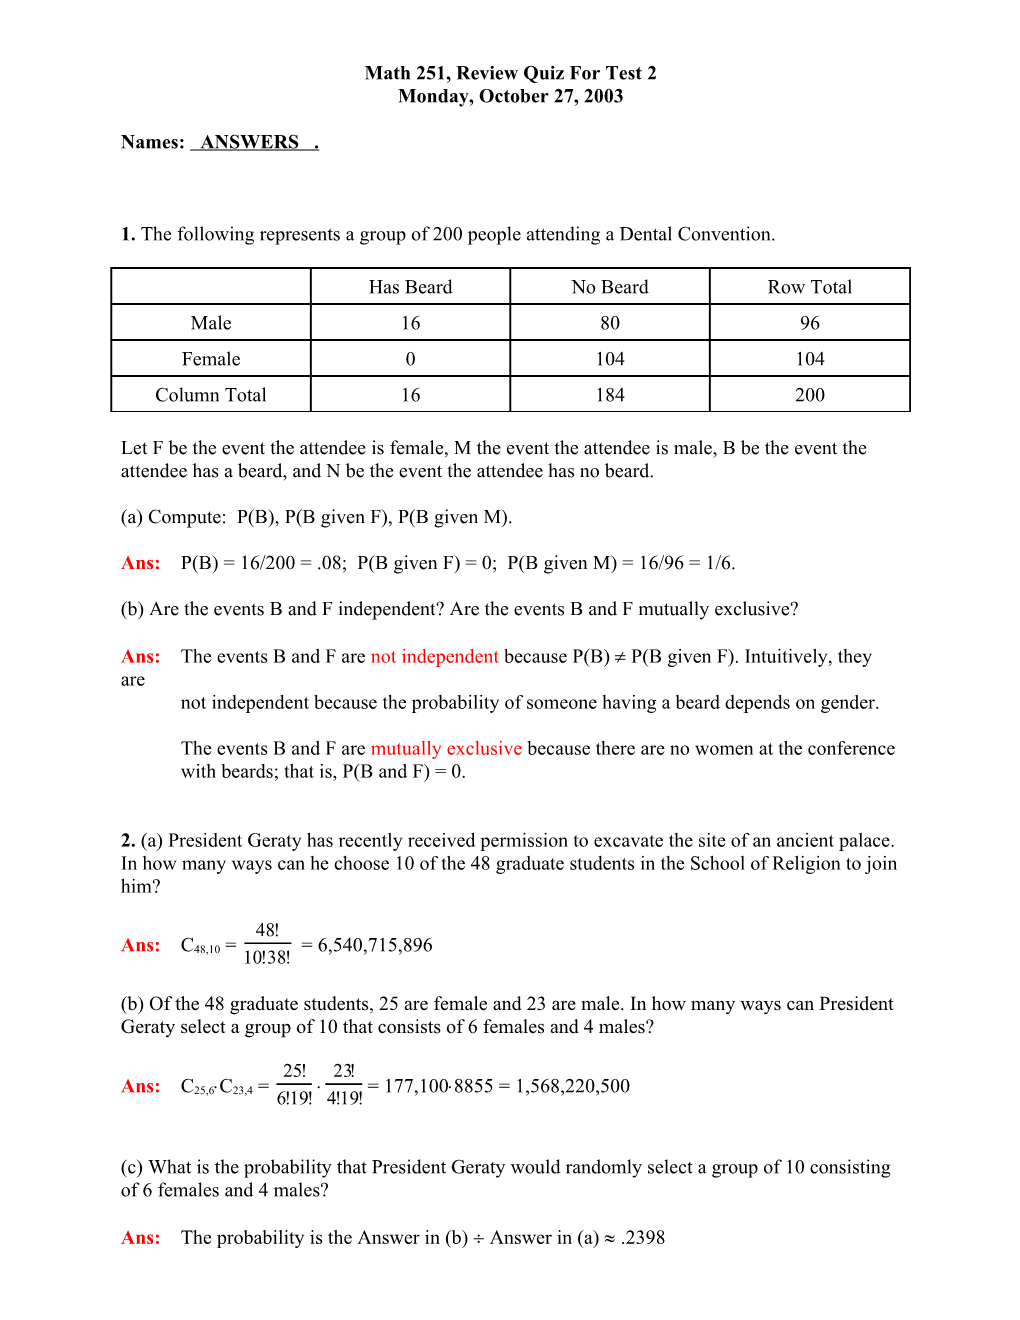 Math 251, Review Quiz for Test 2